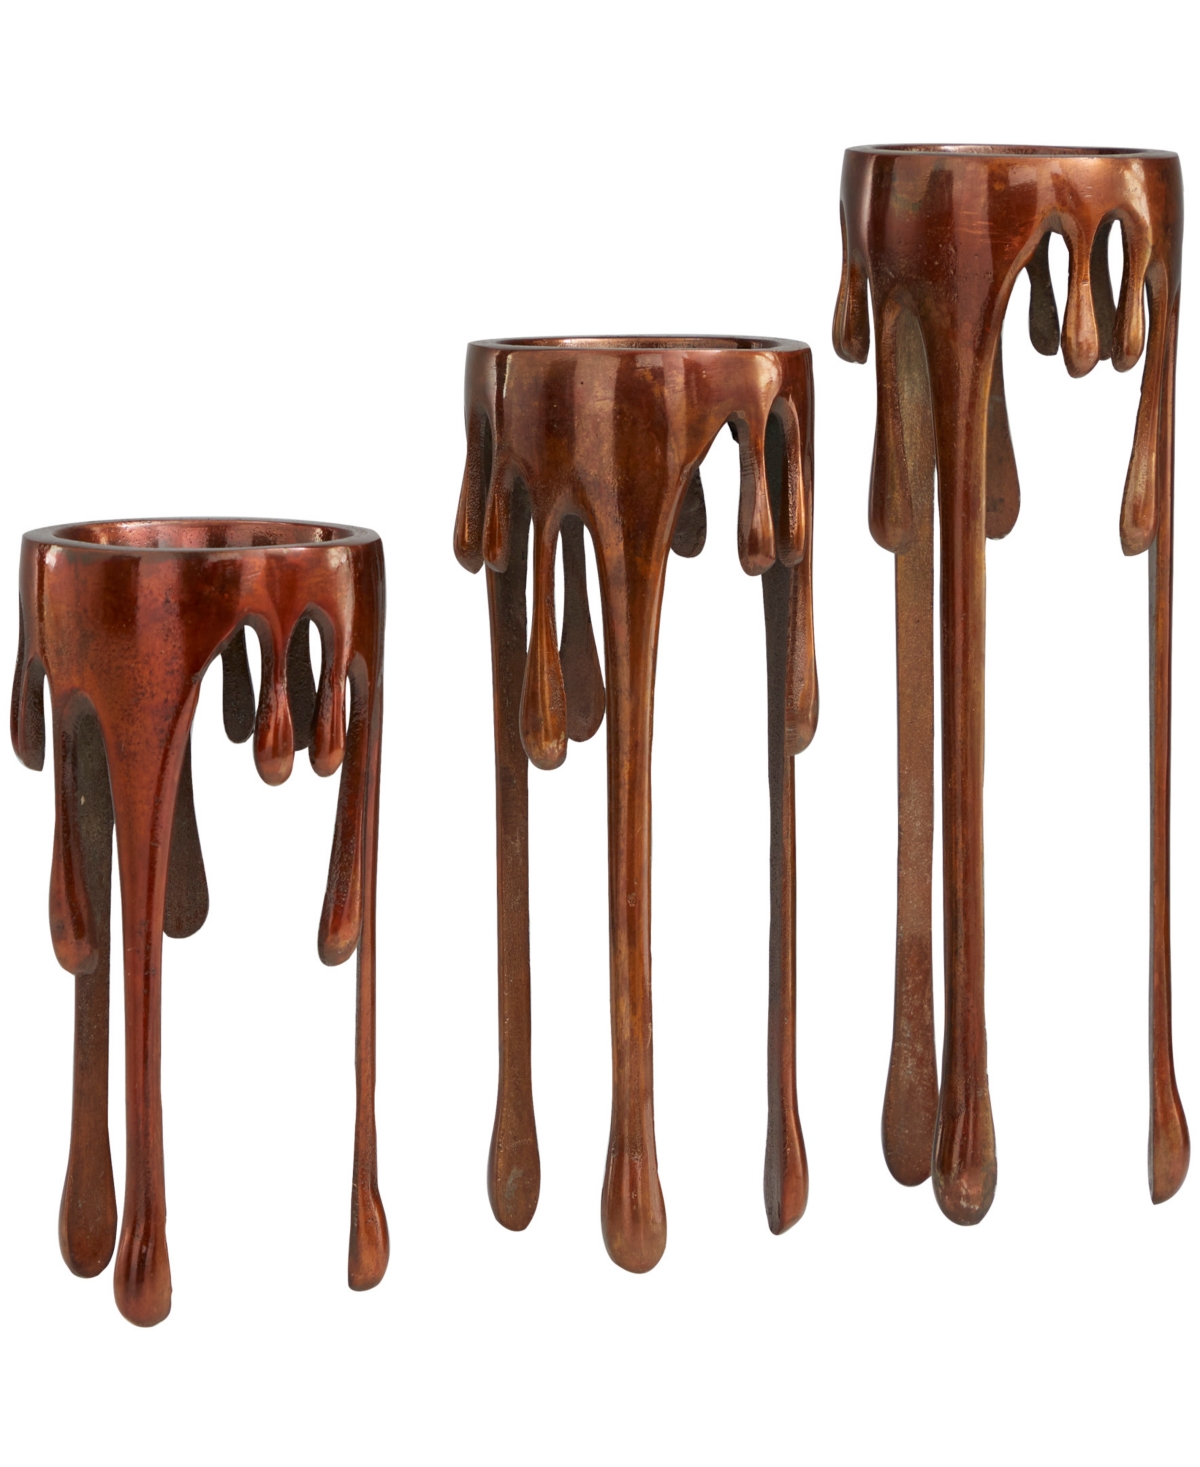 Shop Rosemary Lane Aluminum Pillar Candle Holder With Dripping Melting Designed Legs Set Of 3 In Copper